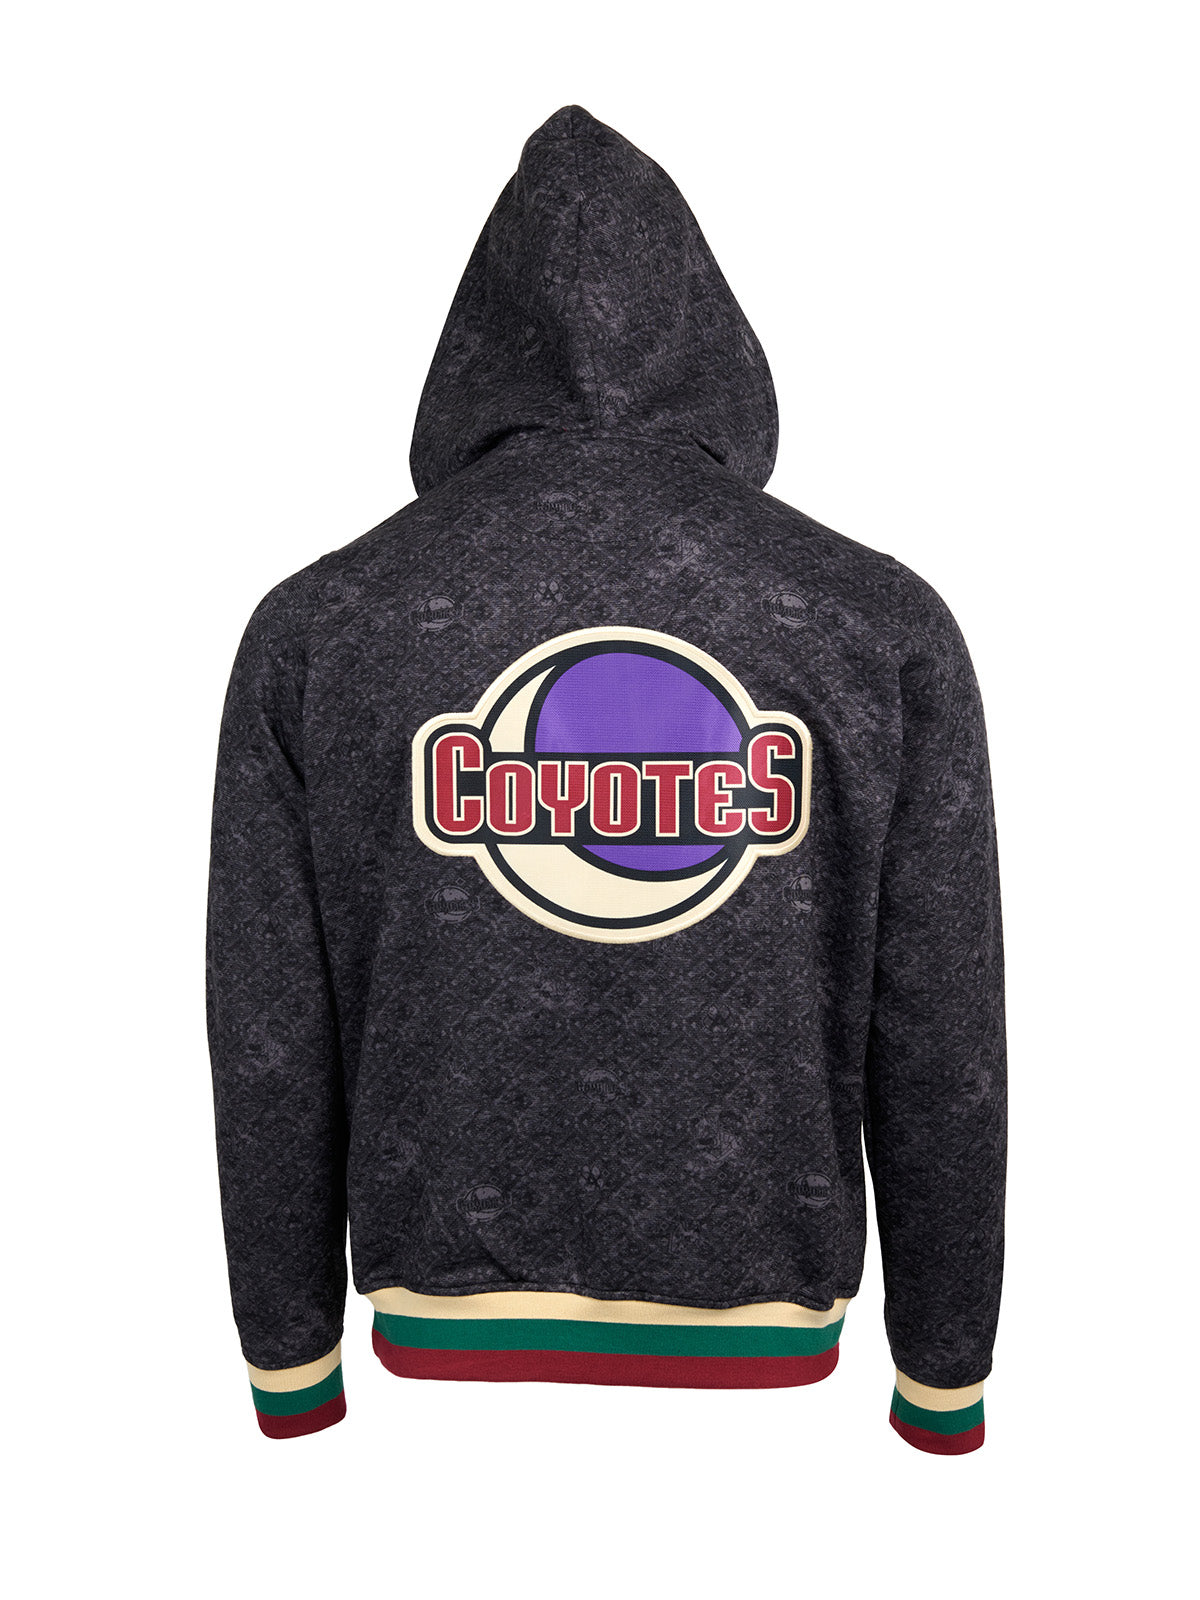 Arizona Coyotes Hoodie - Show your team spirit, with the iconic team logo patch centered on the back, and proudly display your Arizona Coyotes support in their team colors with this NHL hockey hoodie.